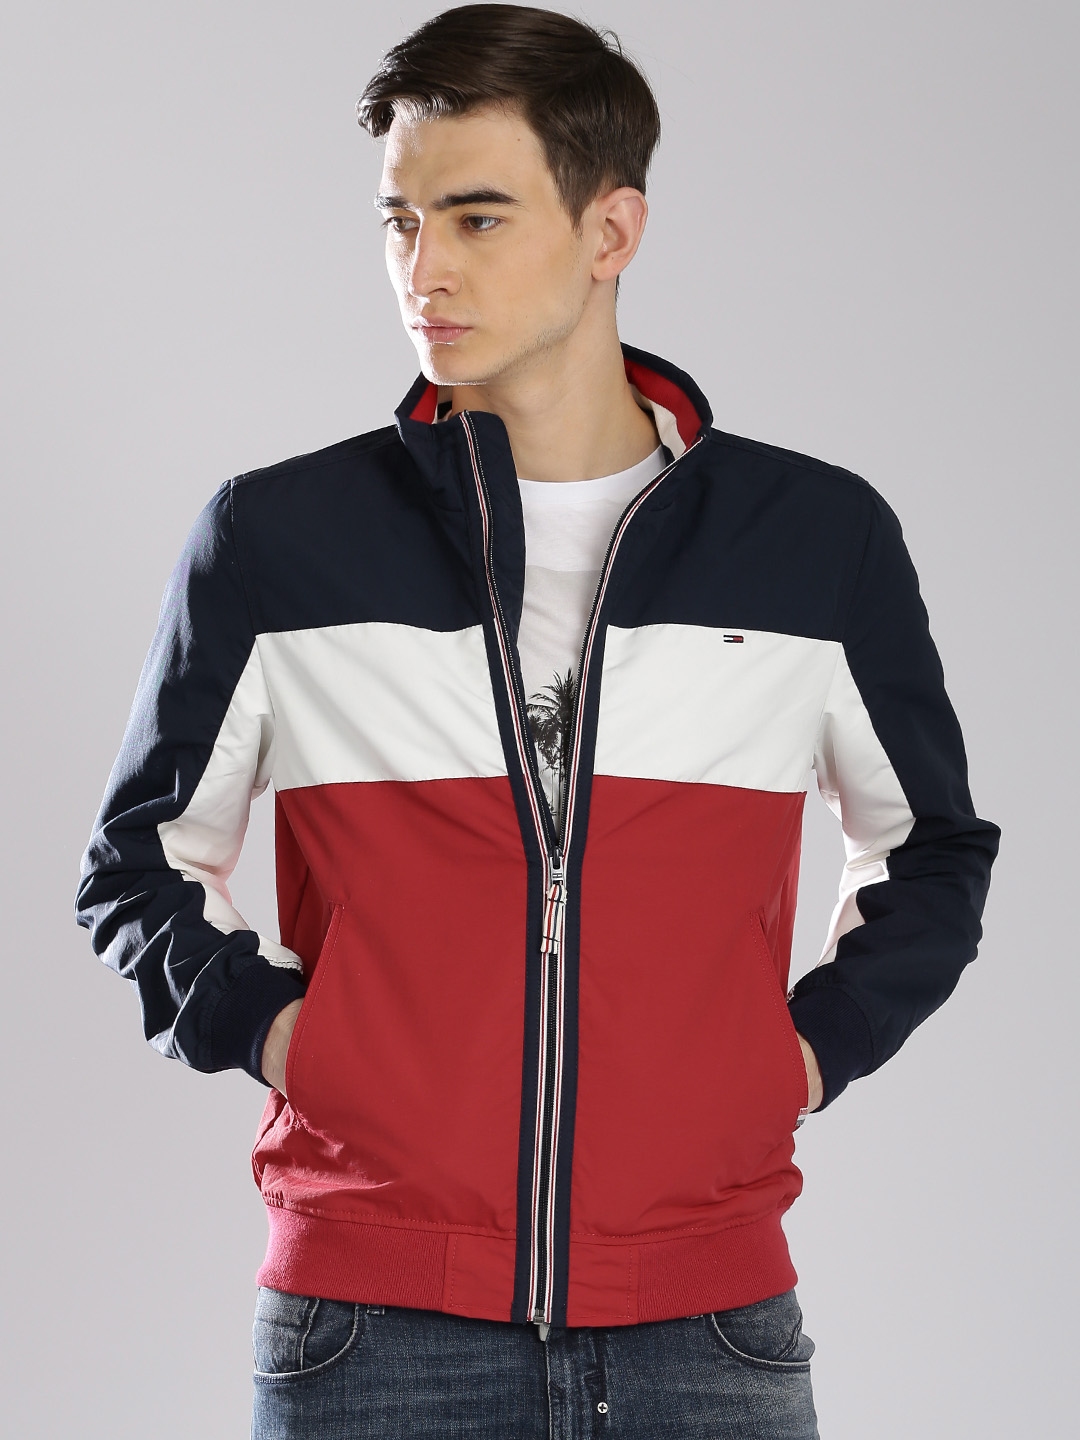 Buy Tommy Hilfiger Men Red & Navy Colourblocked Jacket - Jackets for ...